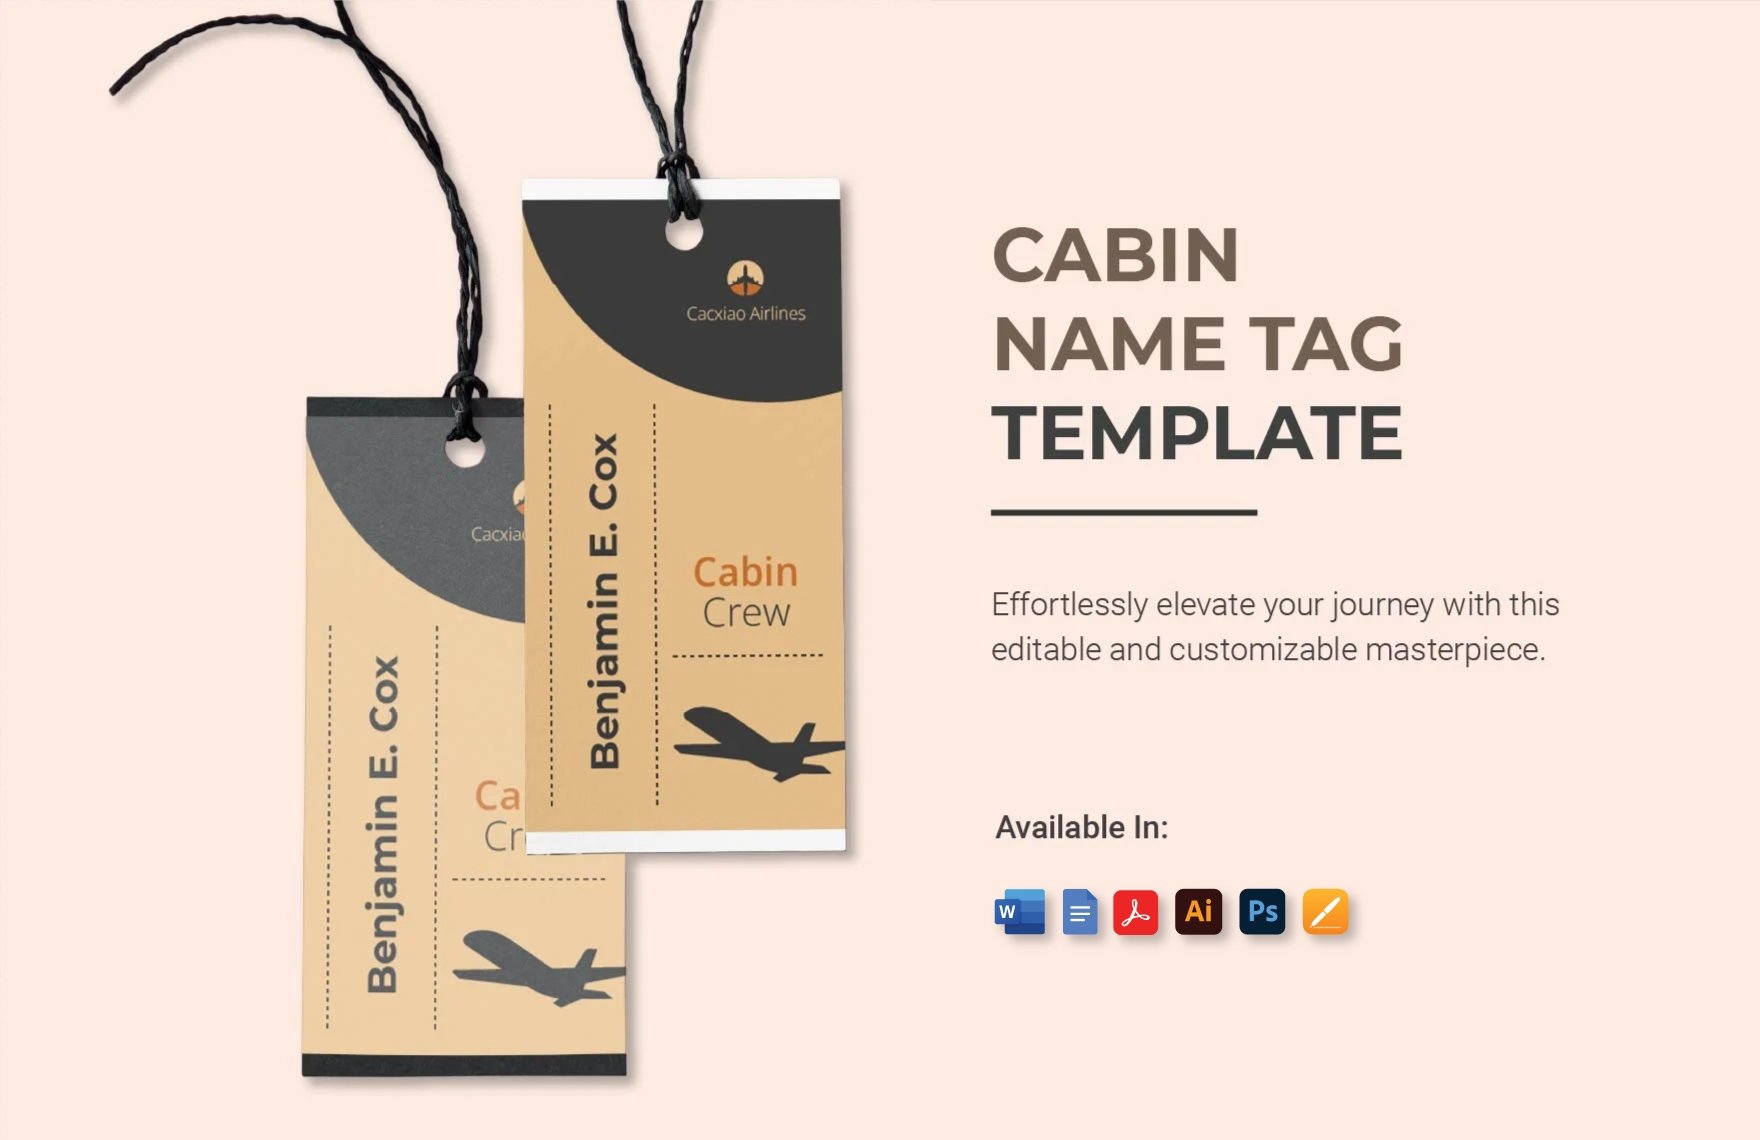 Free Cabin Name Tag Template in Word, Google Docs, PDF, Illustrator, PSD, Apple Pages